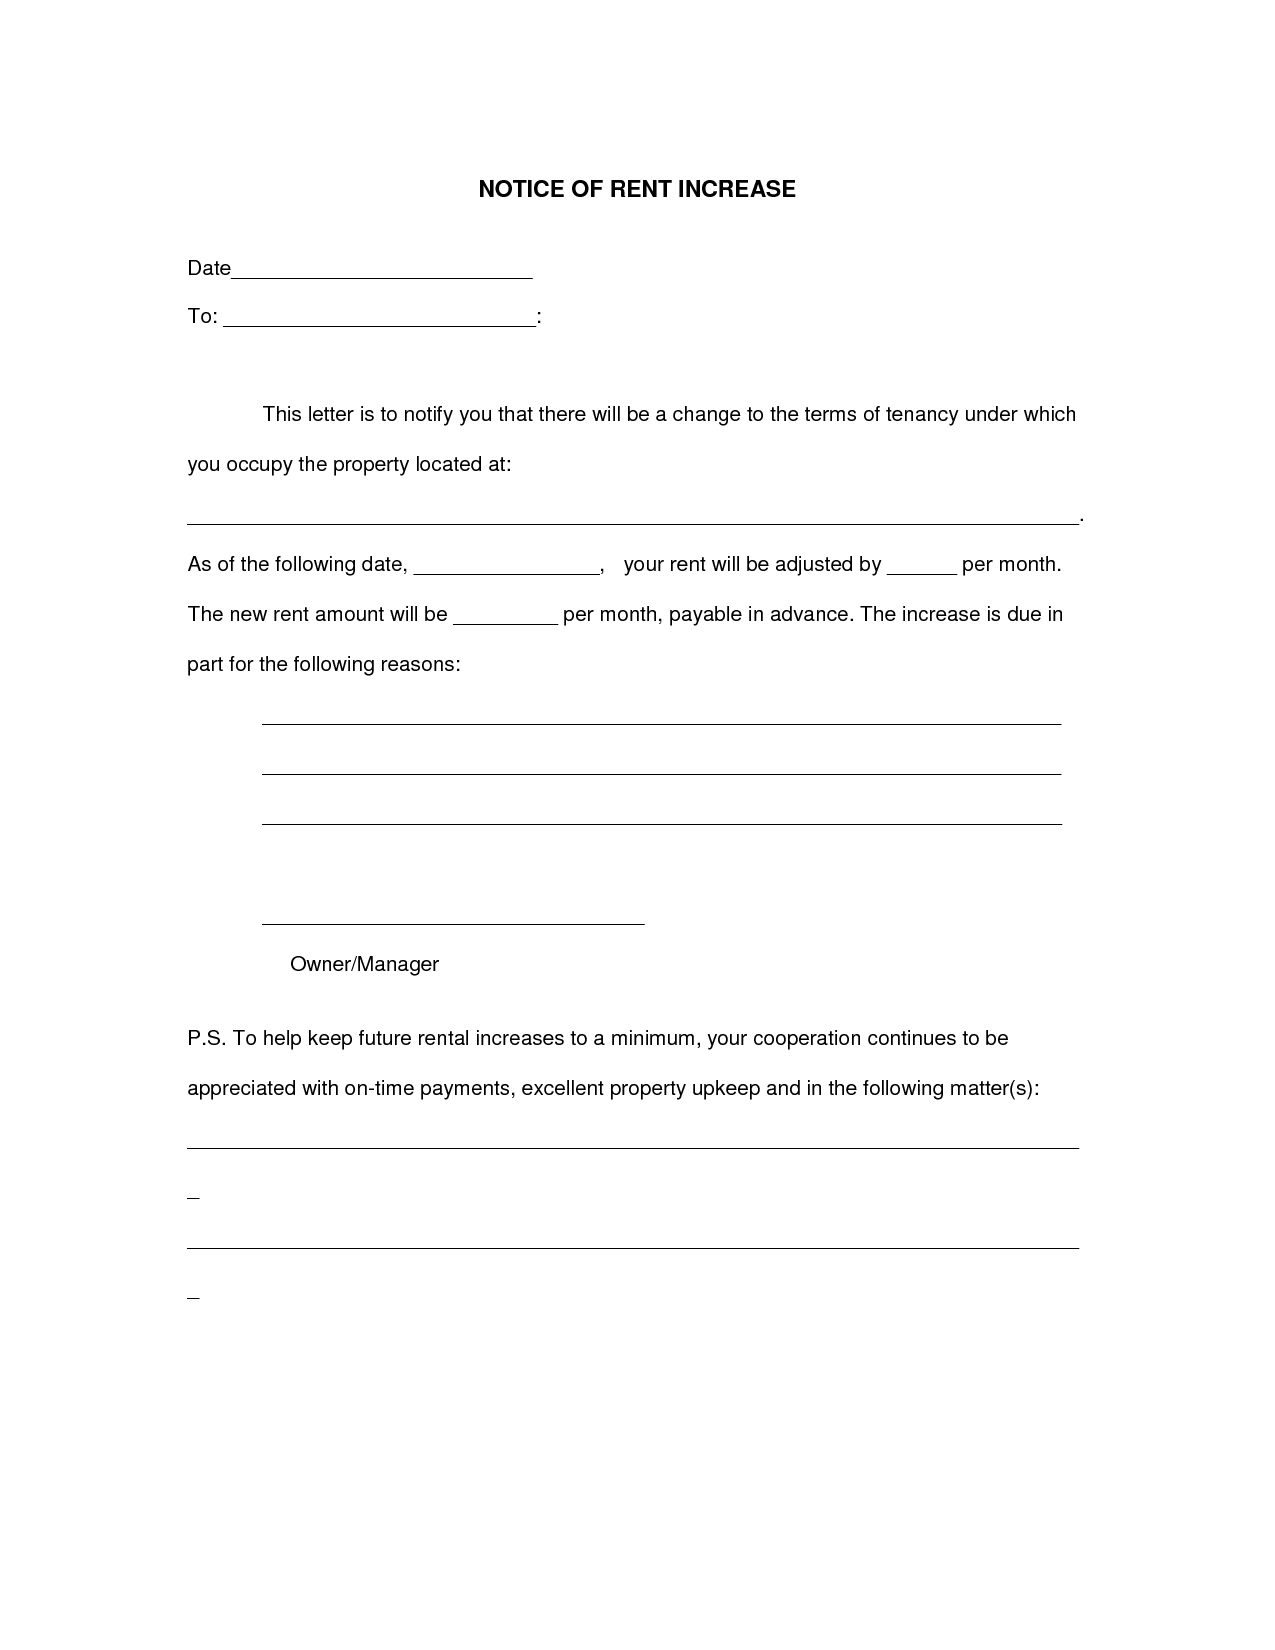 Letter Template For Notice To Landlord Best Of Rental Letter - Free Printable Rent Increase Letter